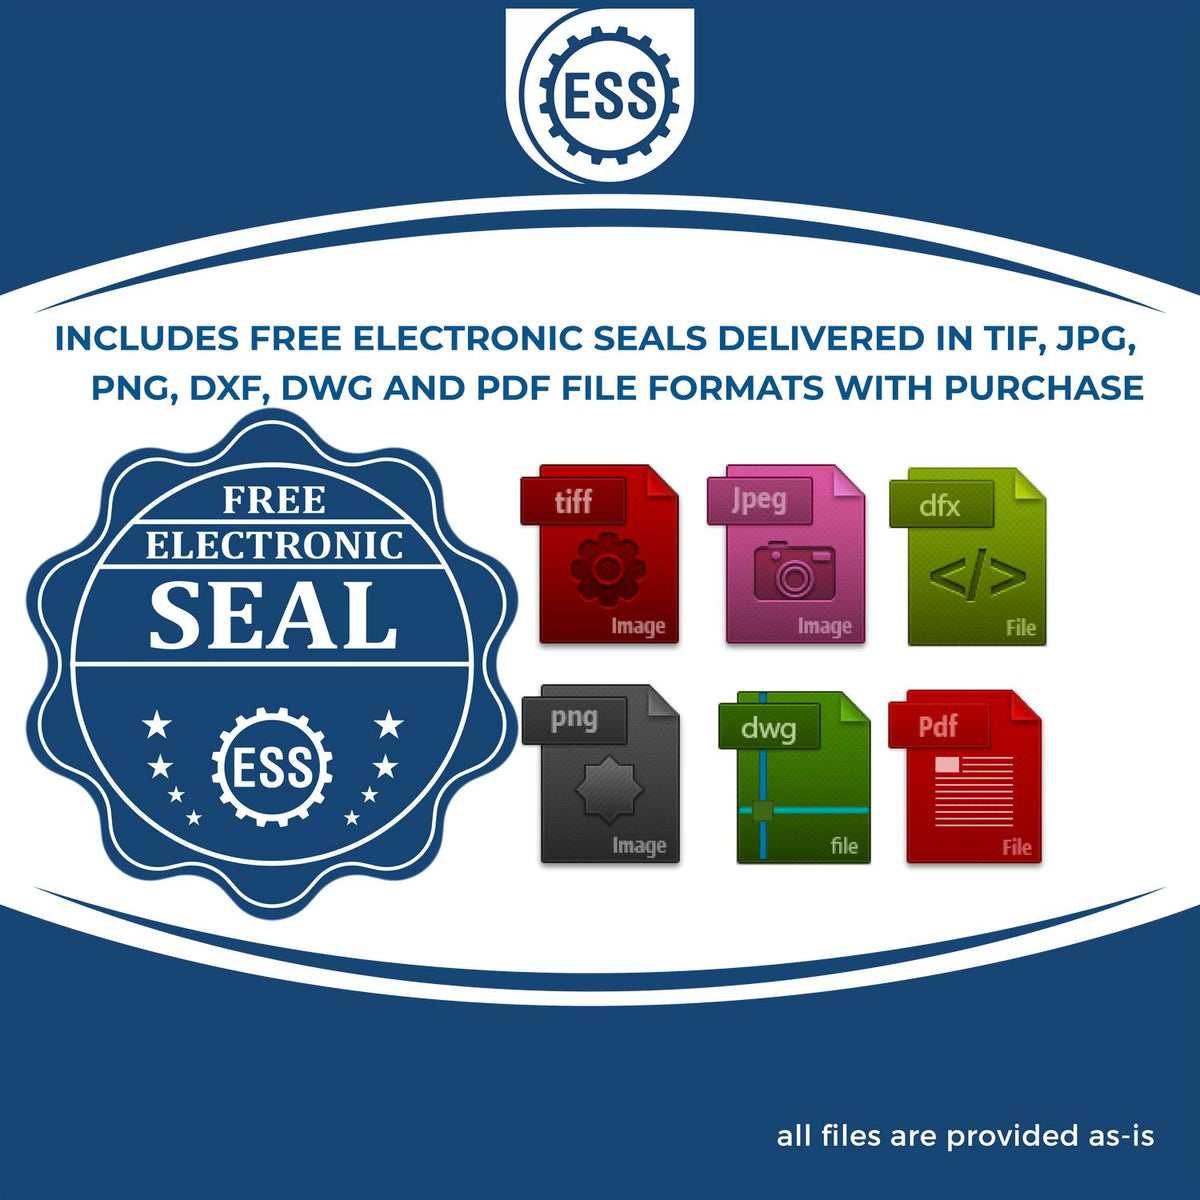 An infographic for the free electronic seal for the Soft Nevada Professional Geologist Seal illustrating the different file type icons such as DXF, DWG, TIF, JPG and PNG.